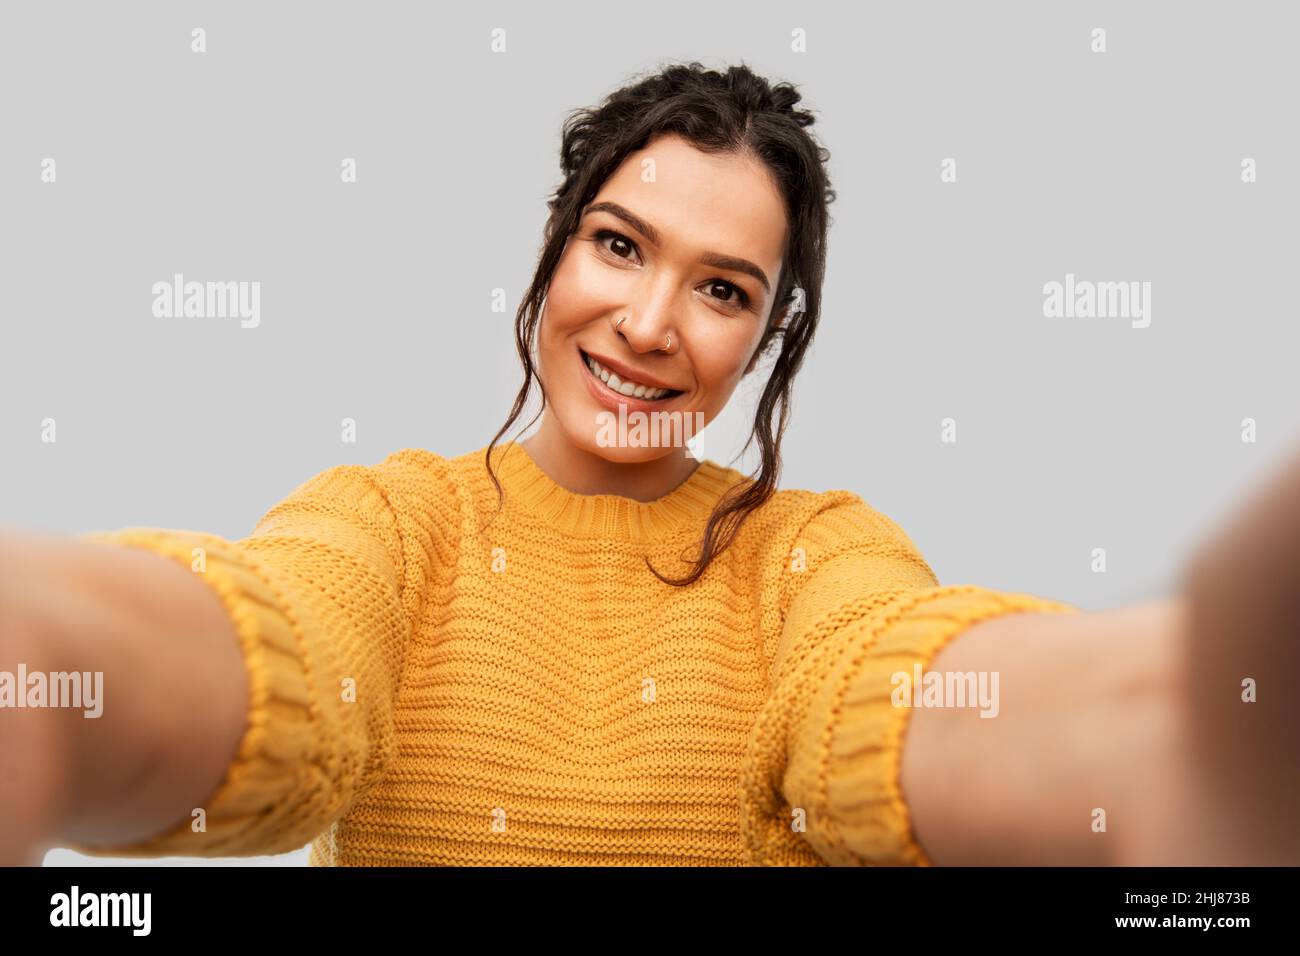 smiling woman with pierced nose taking selfie Stock Photo